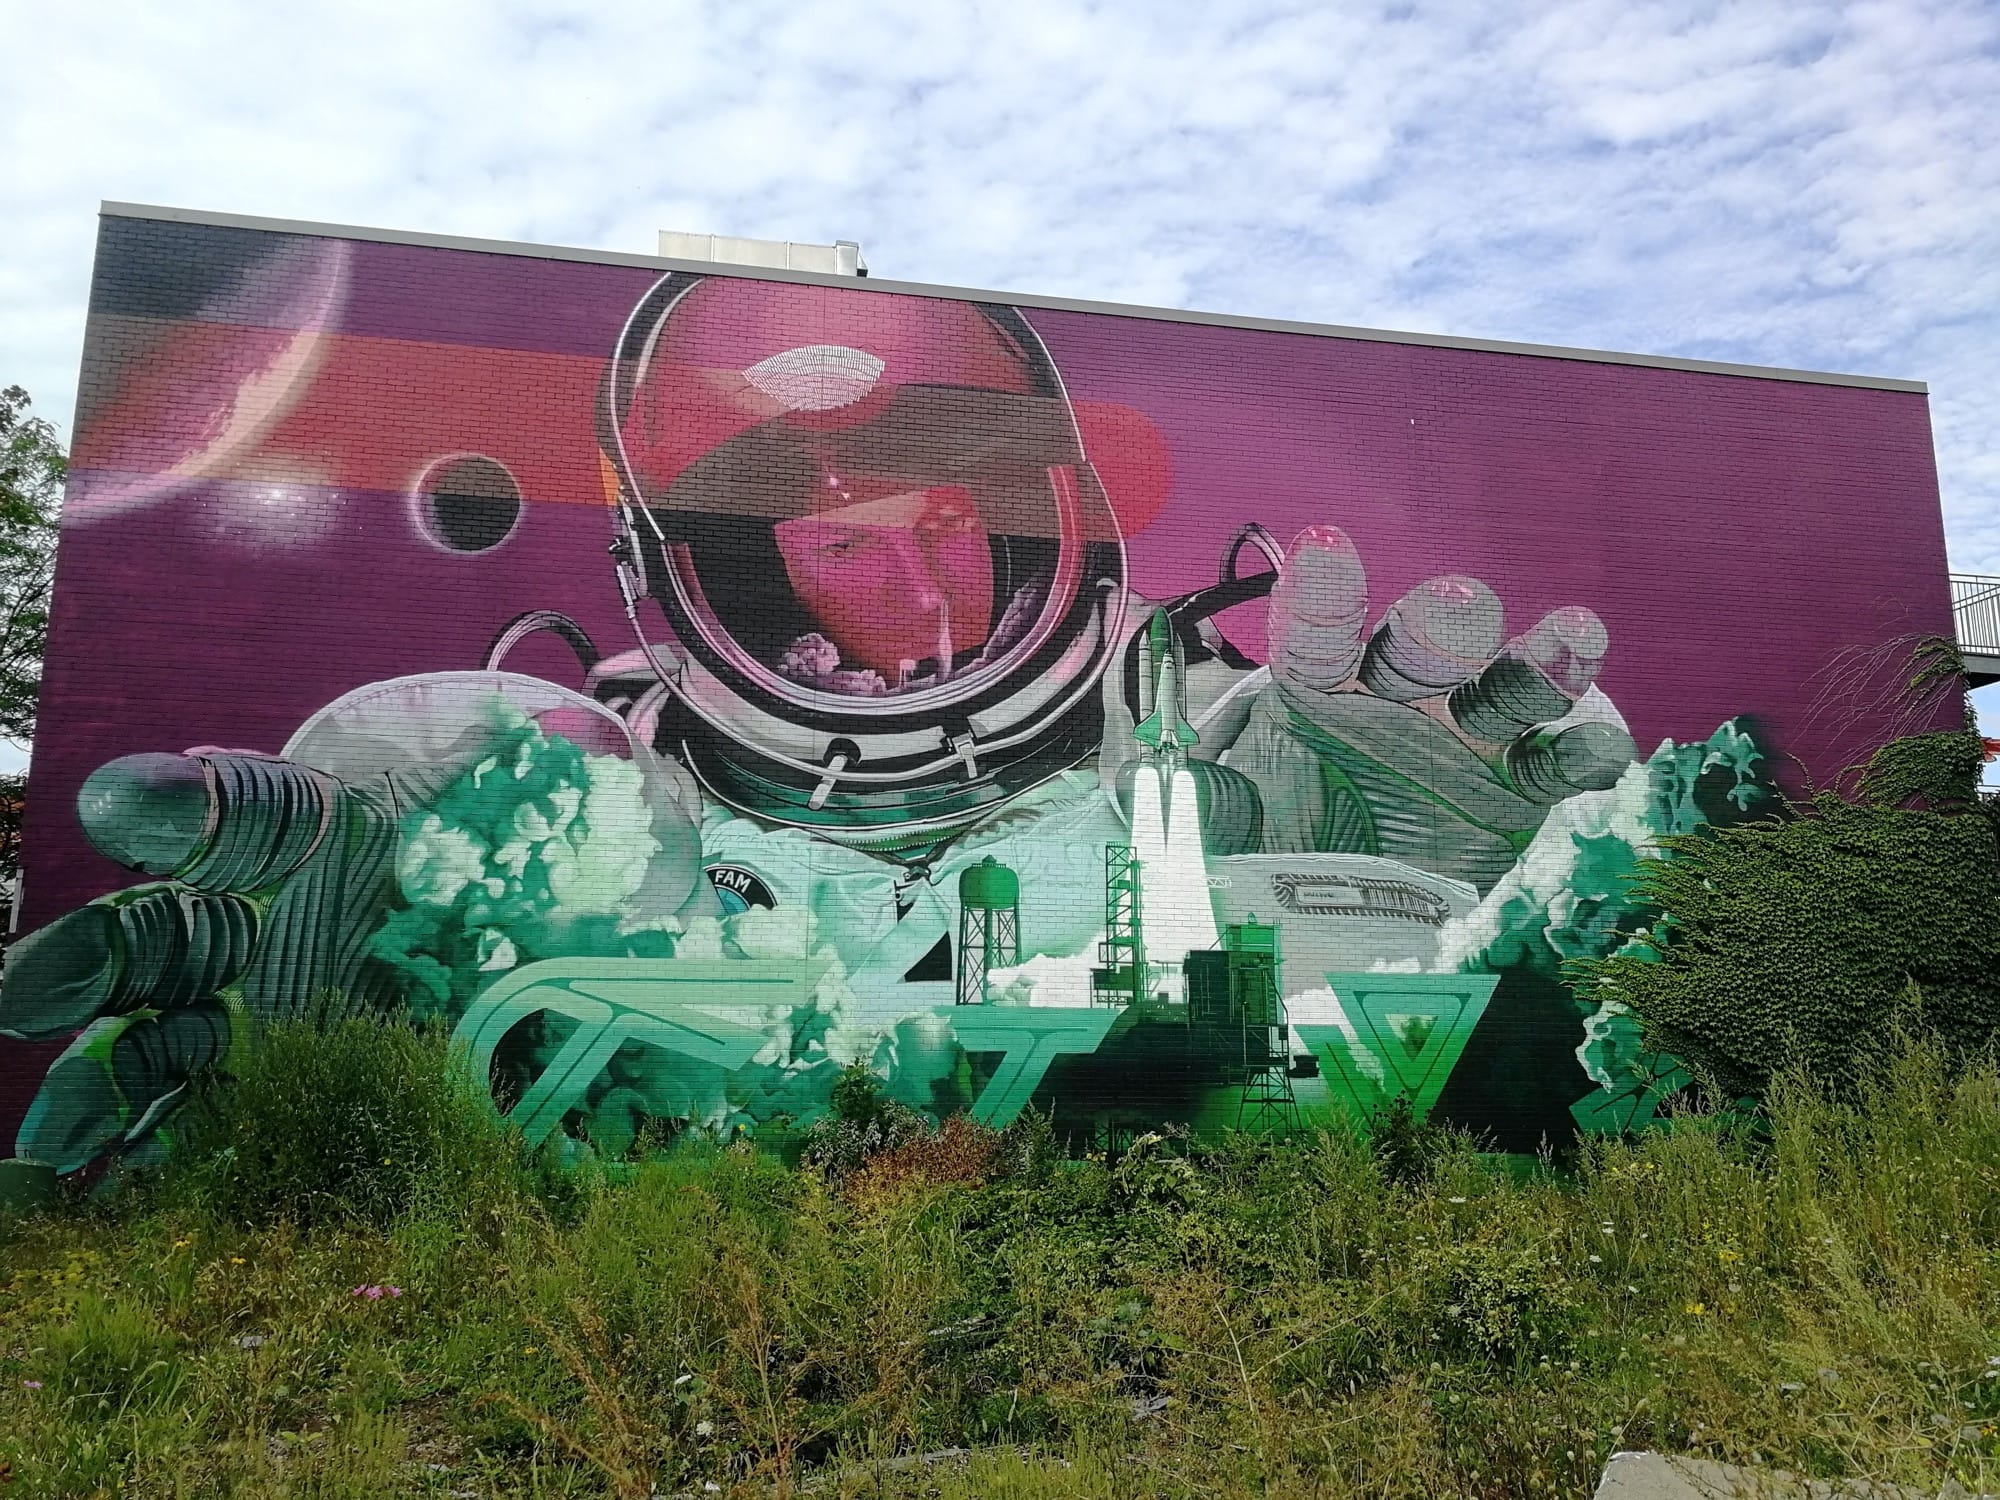 Graffiti 2937  by the artist Five Eight captured by Rabot in Montréal Canada